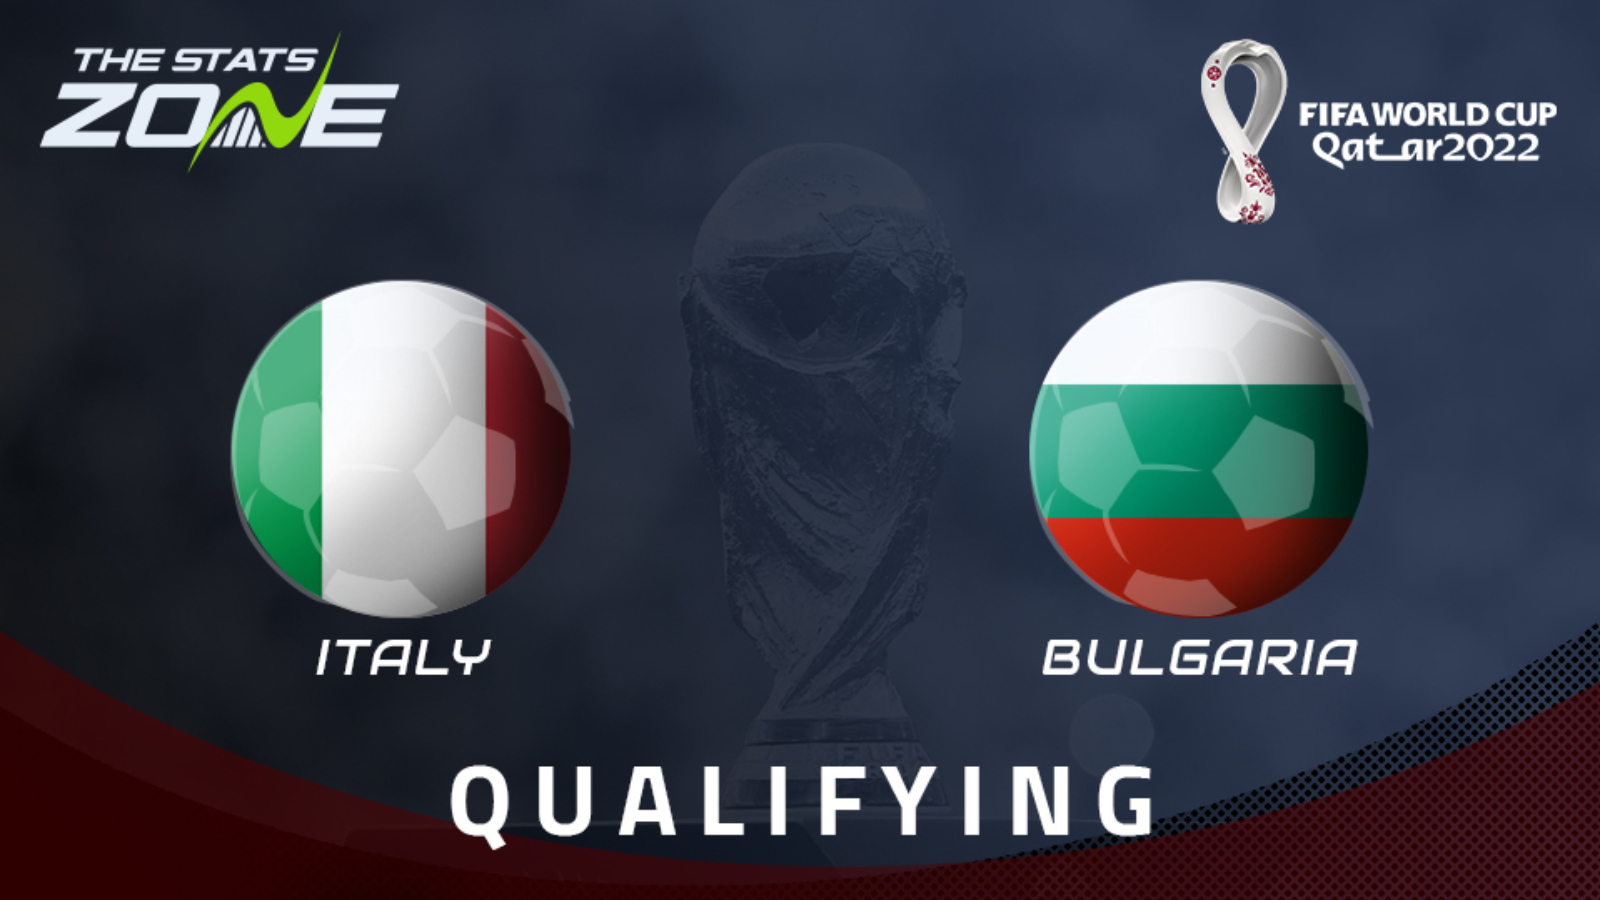 Fifa World Cup 22 European Qualifiers Italy Vs Bulgaria Preview Prediction The Stats Zone